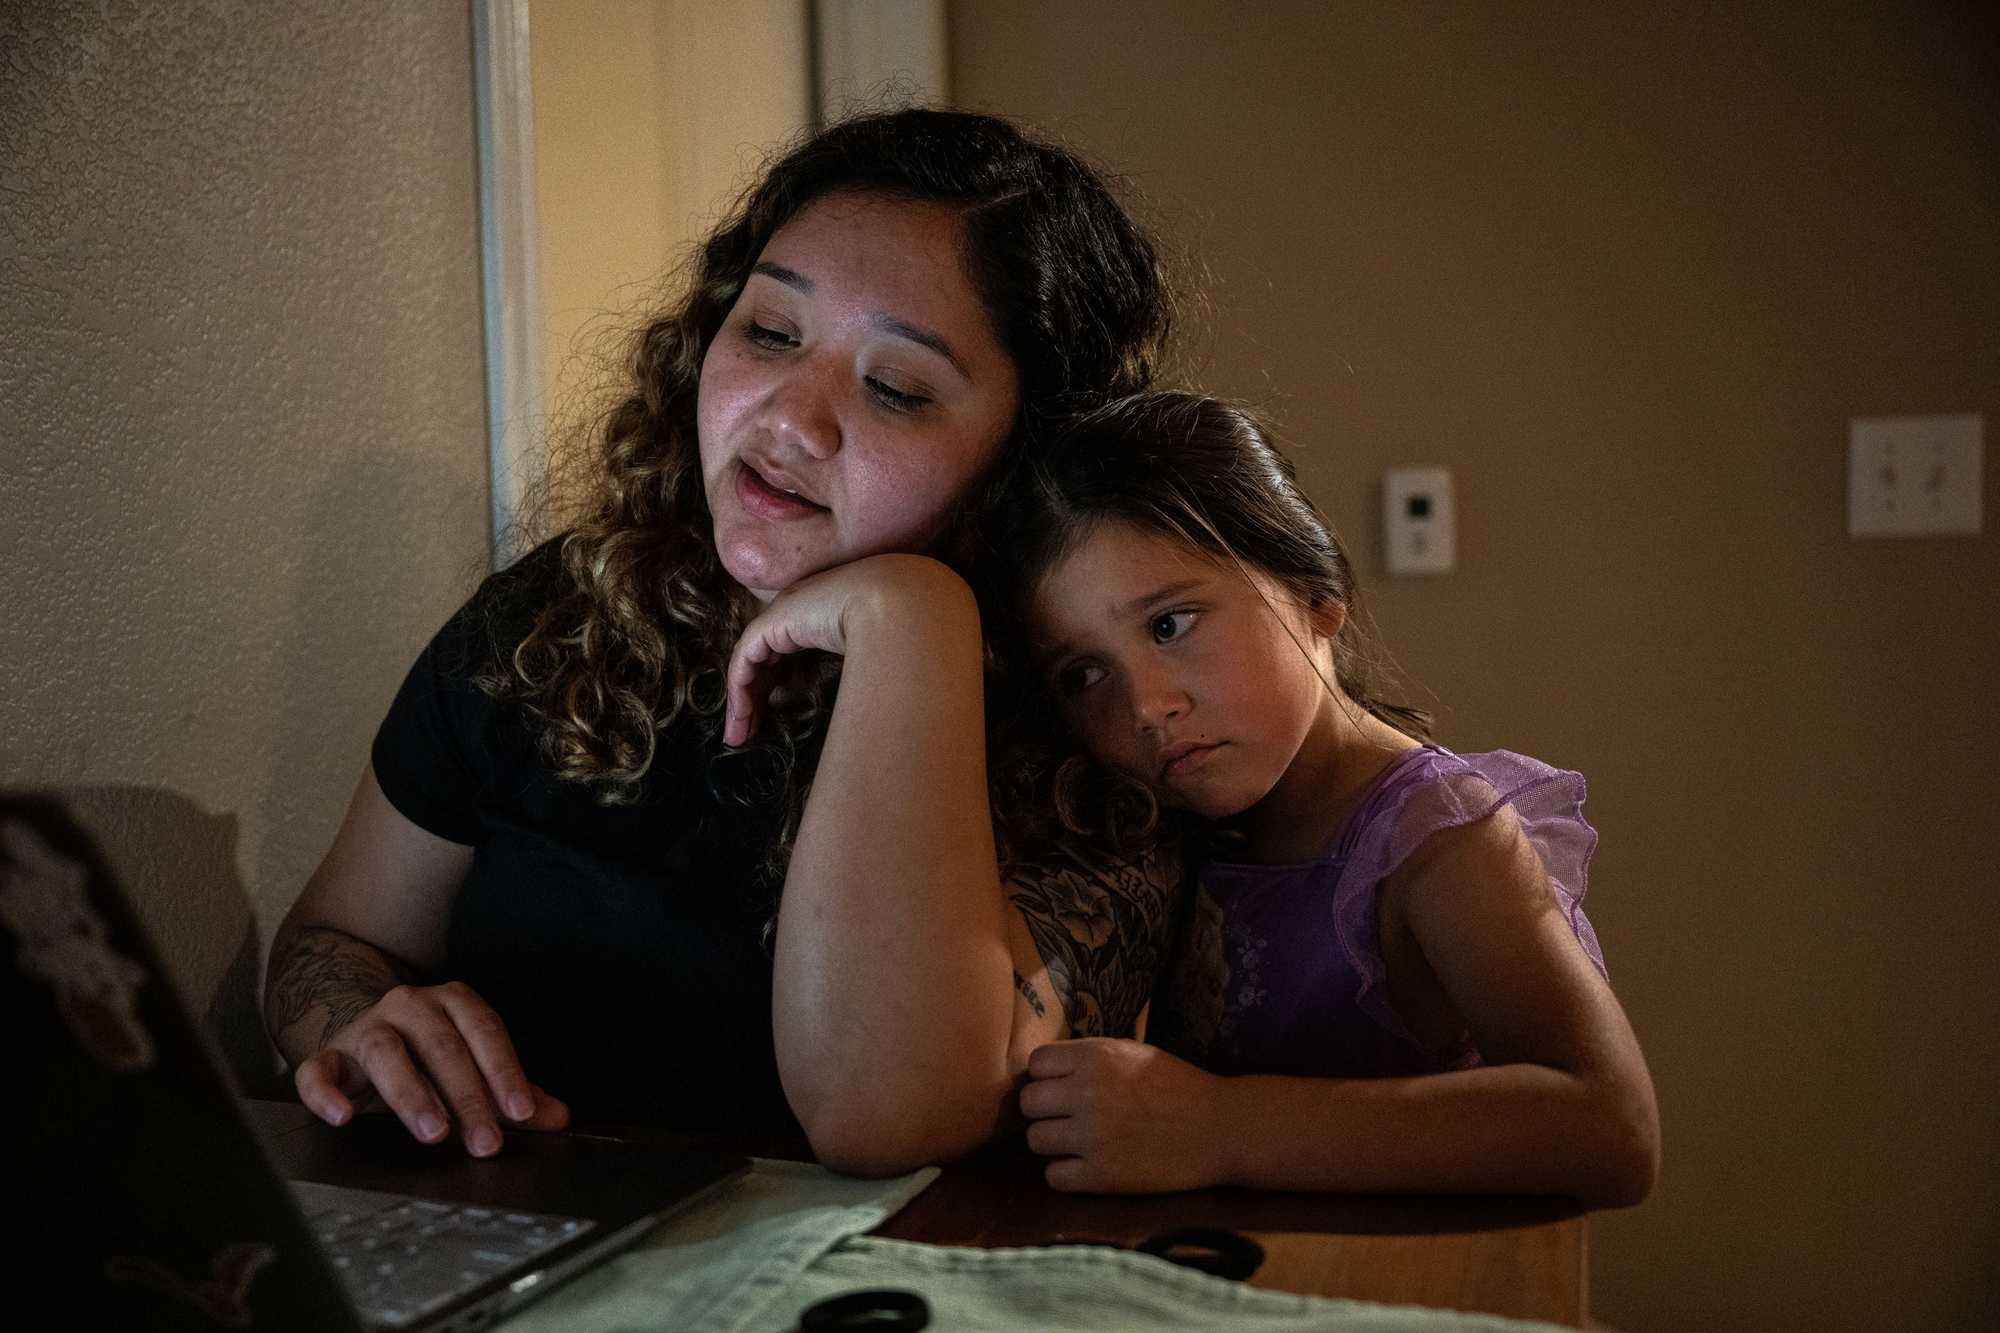 Jae MacDuffee, 5, leaned on her mother, Selena Osuna, as she worked on an essay for her Texas State University social work program at her apartment in Hutto, Texas. (Tamir Kalifa for The Boston Globe)